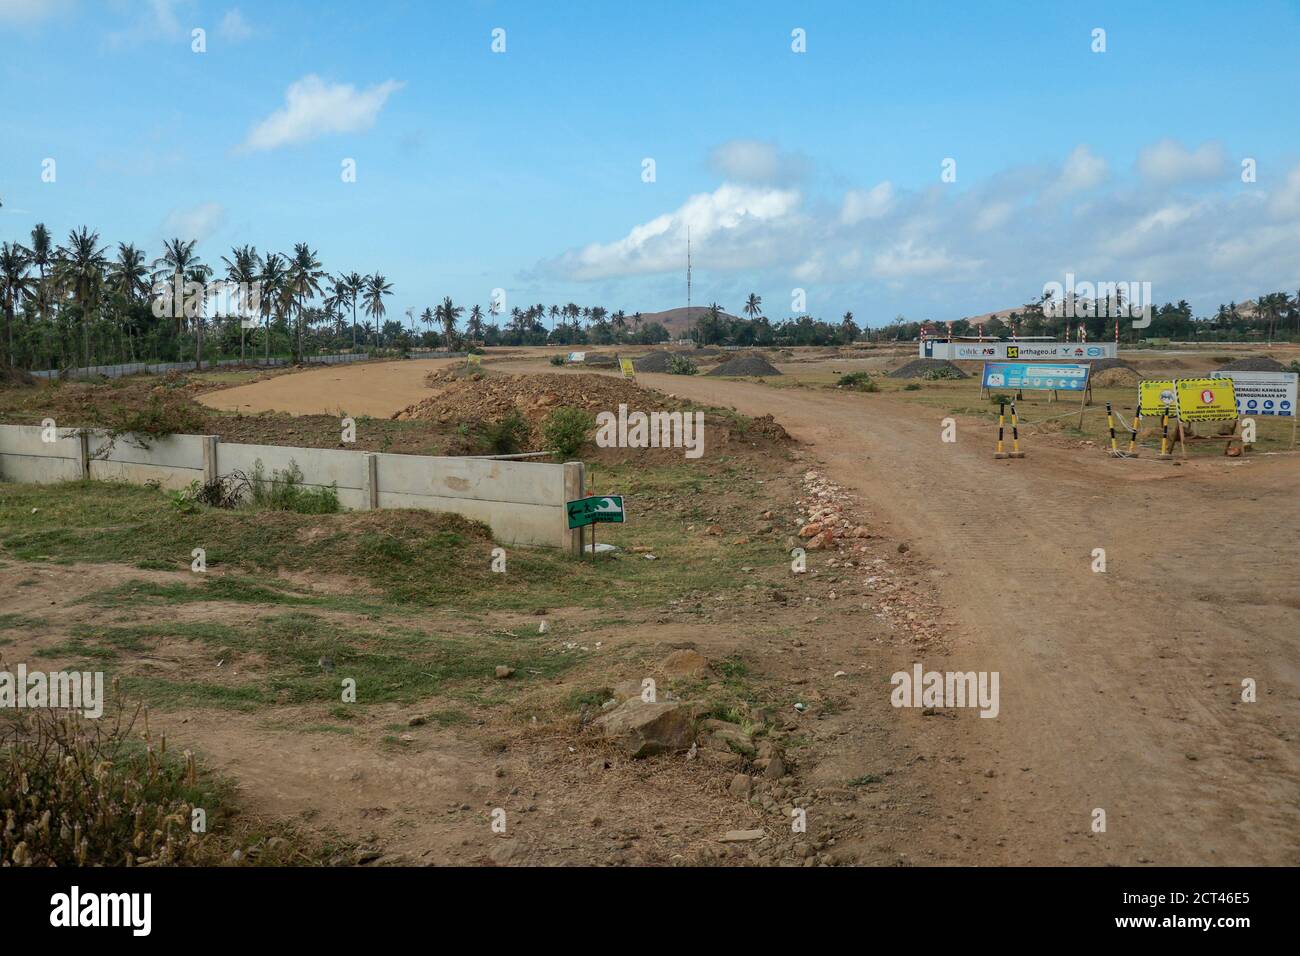 Construction of a complex on the Motogp Mandalika circuit, West Nusa Tenggara, Lombok, Indonesia. Banners with a plan of the area and the racing Stock Photo